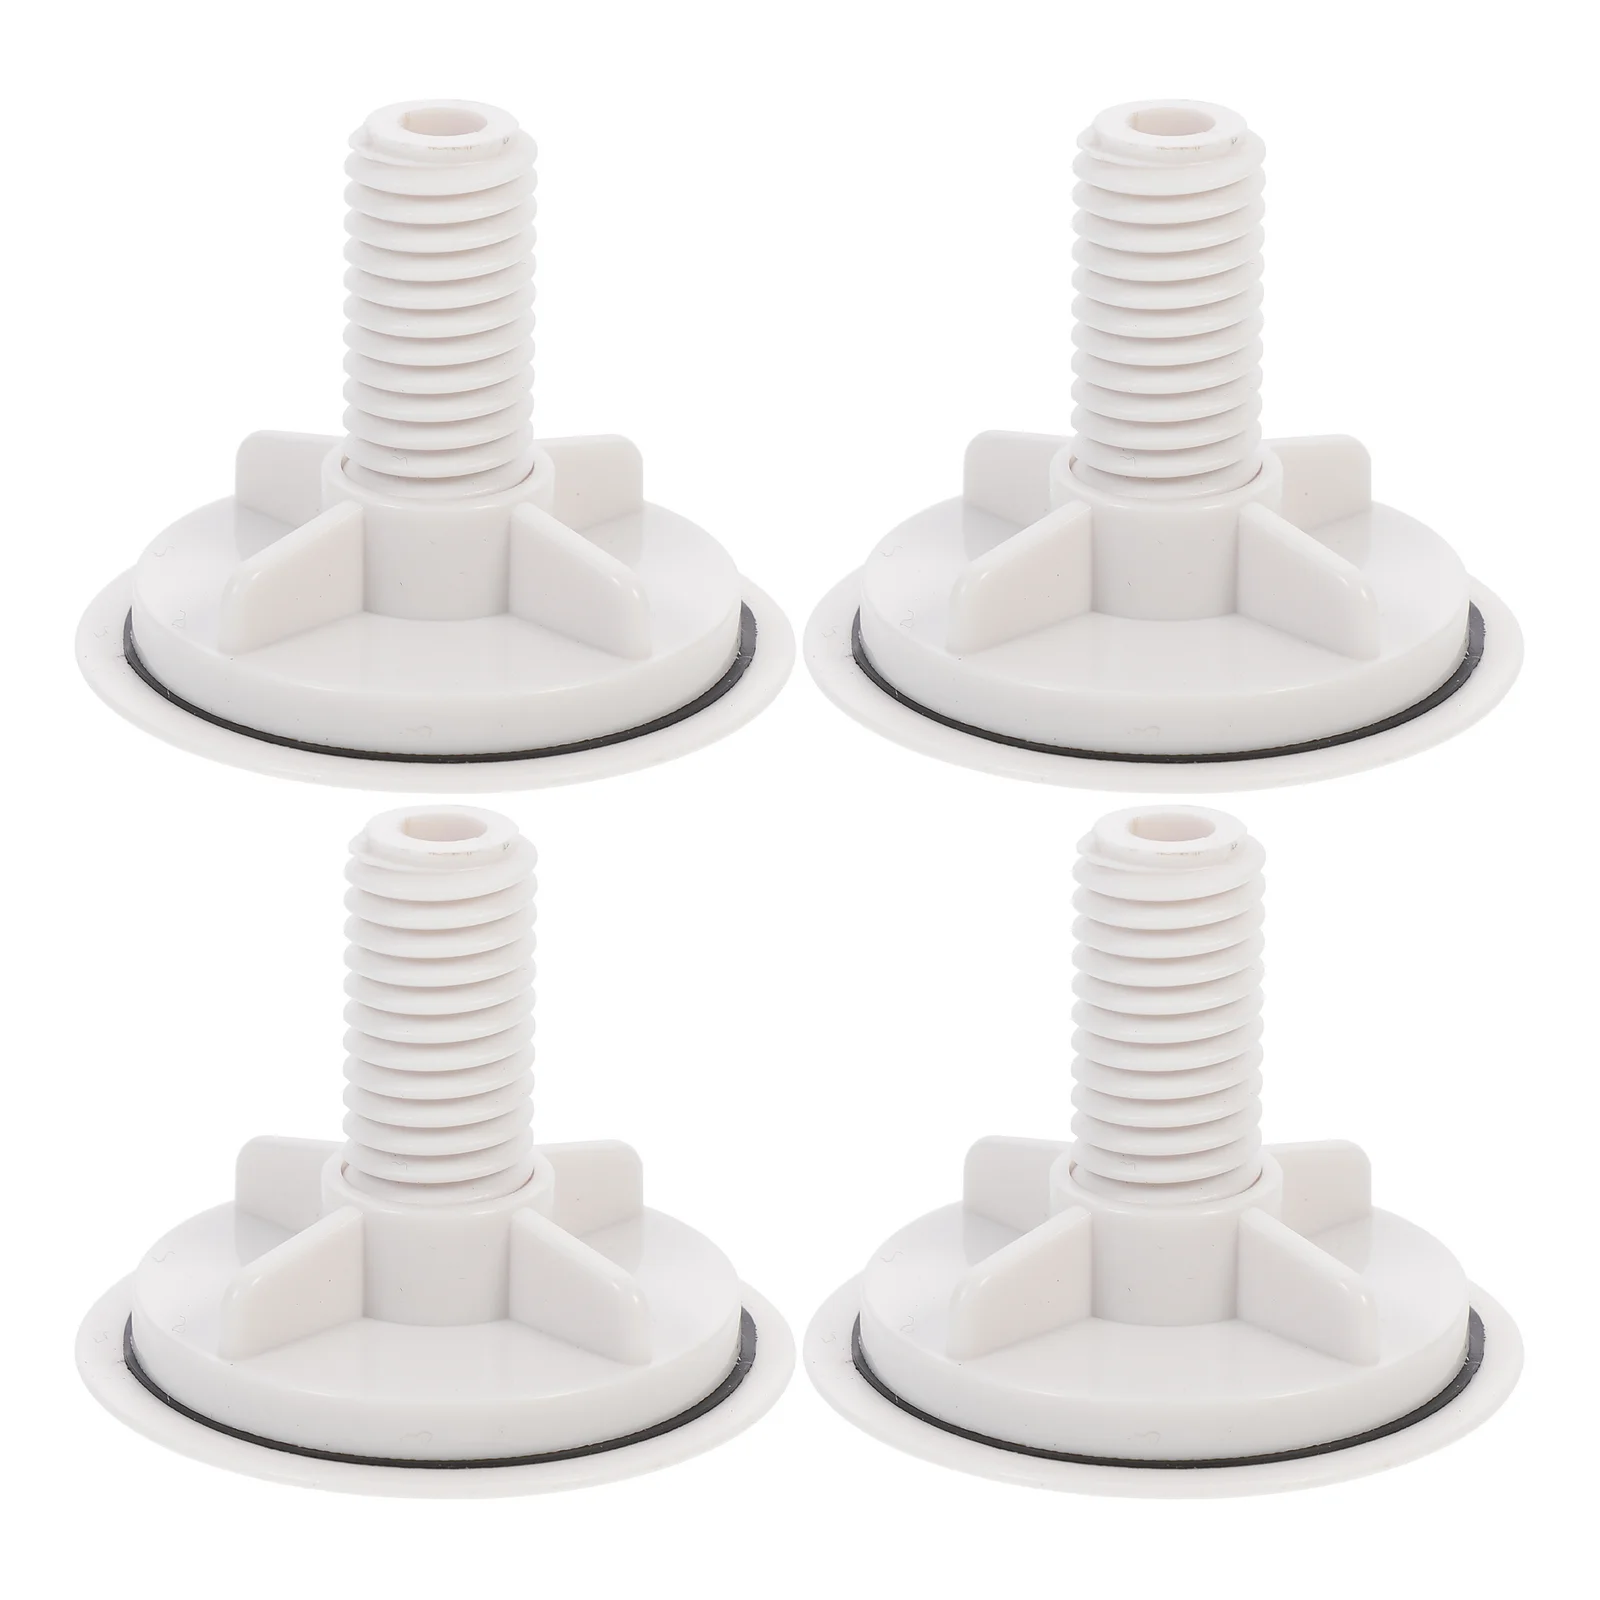 

4 Pcs Decorative Sink Cover Counter Hole Holes Plug Stopper Metal Tap Plastic Blanking Kitchen Covers Sealing Caps